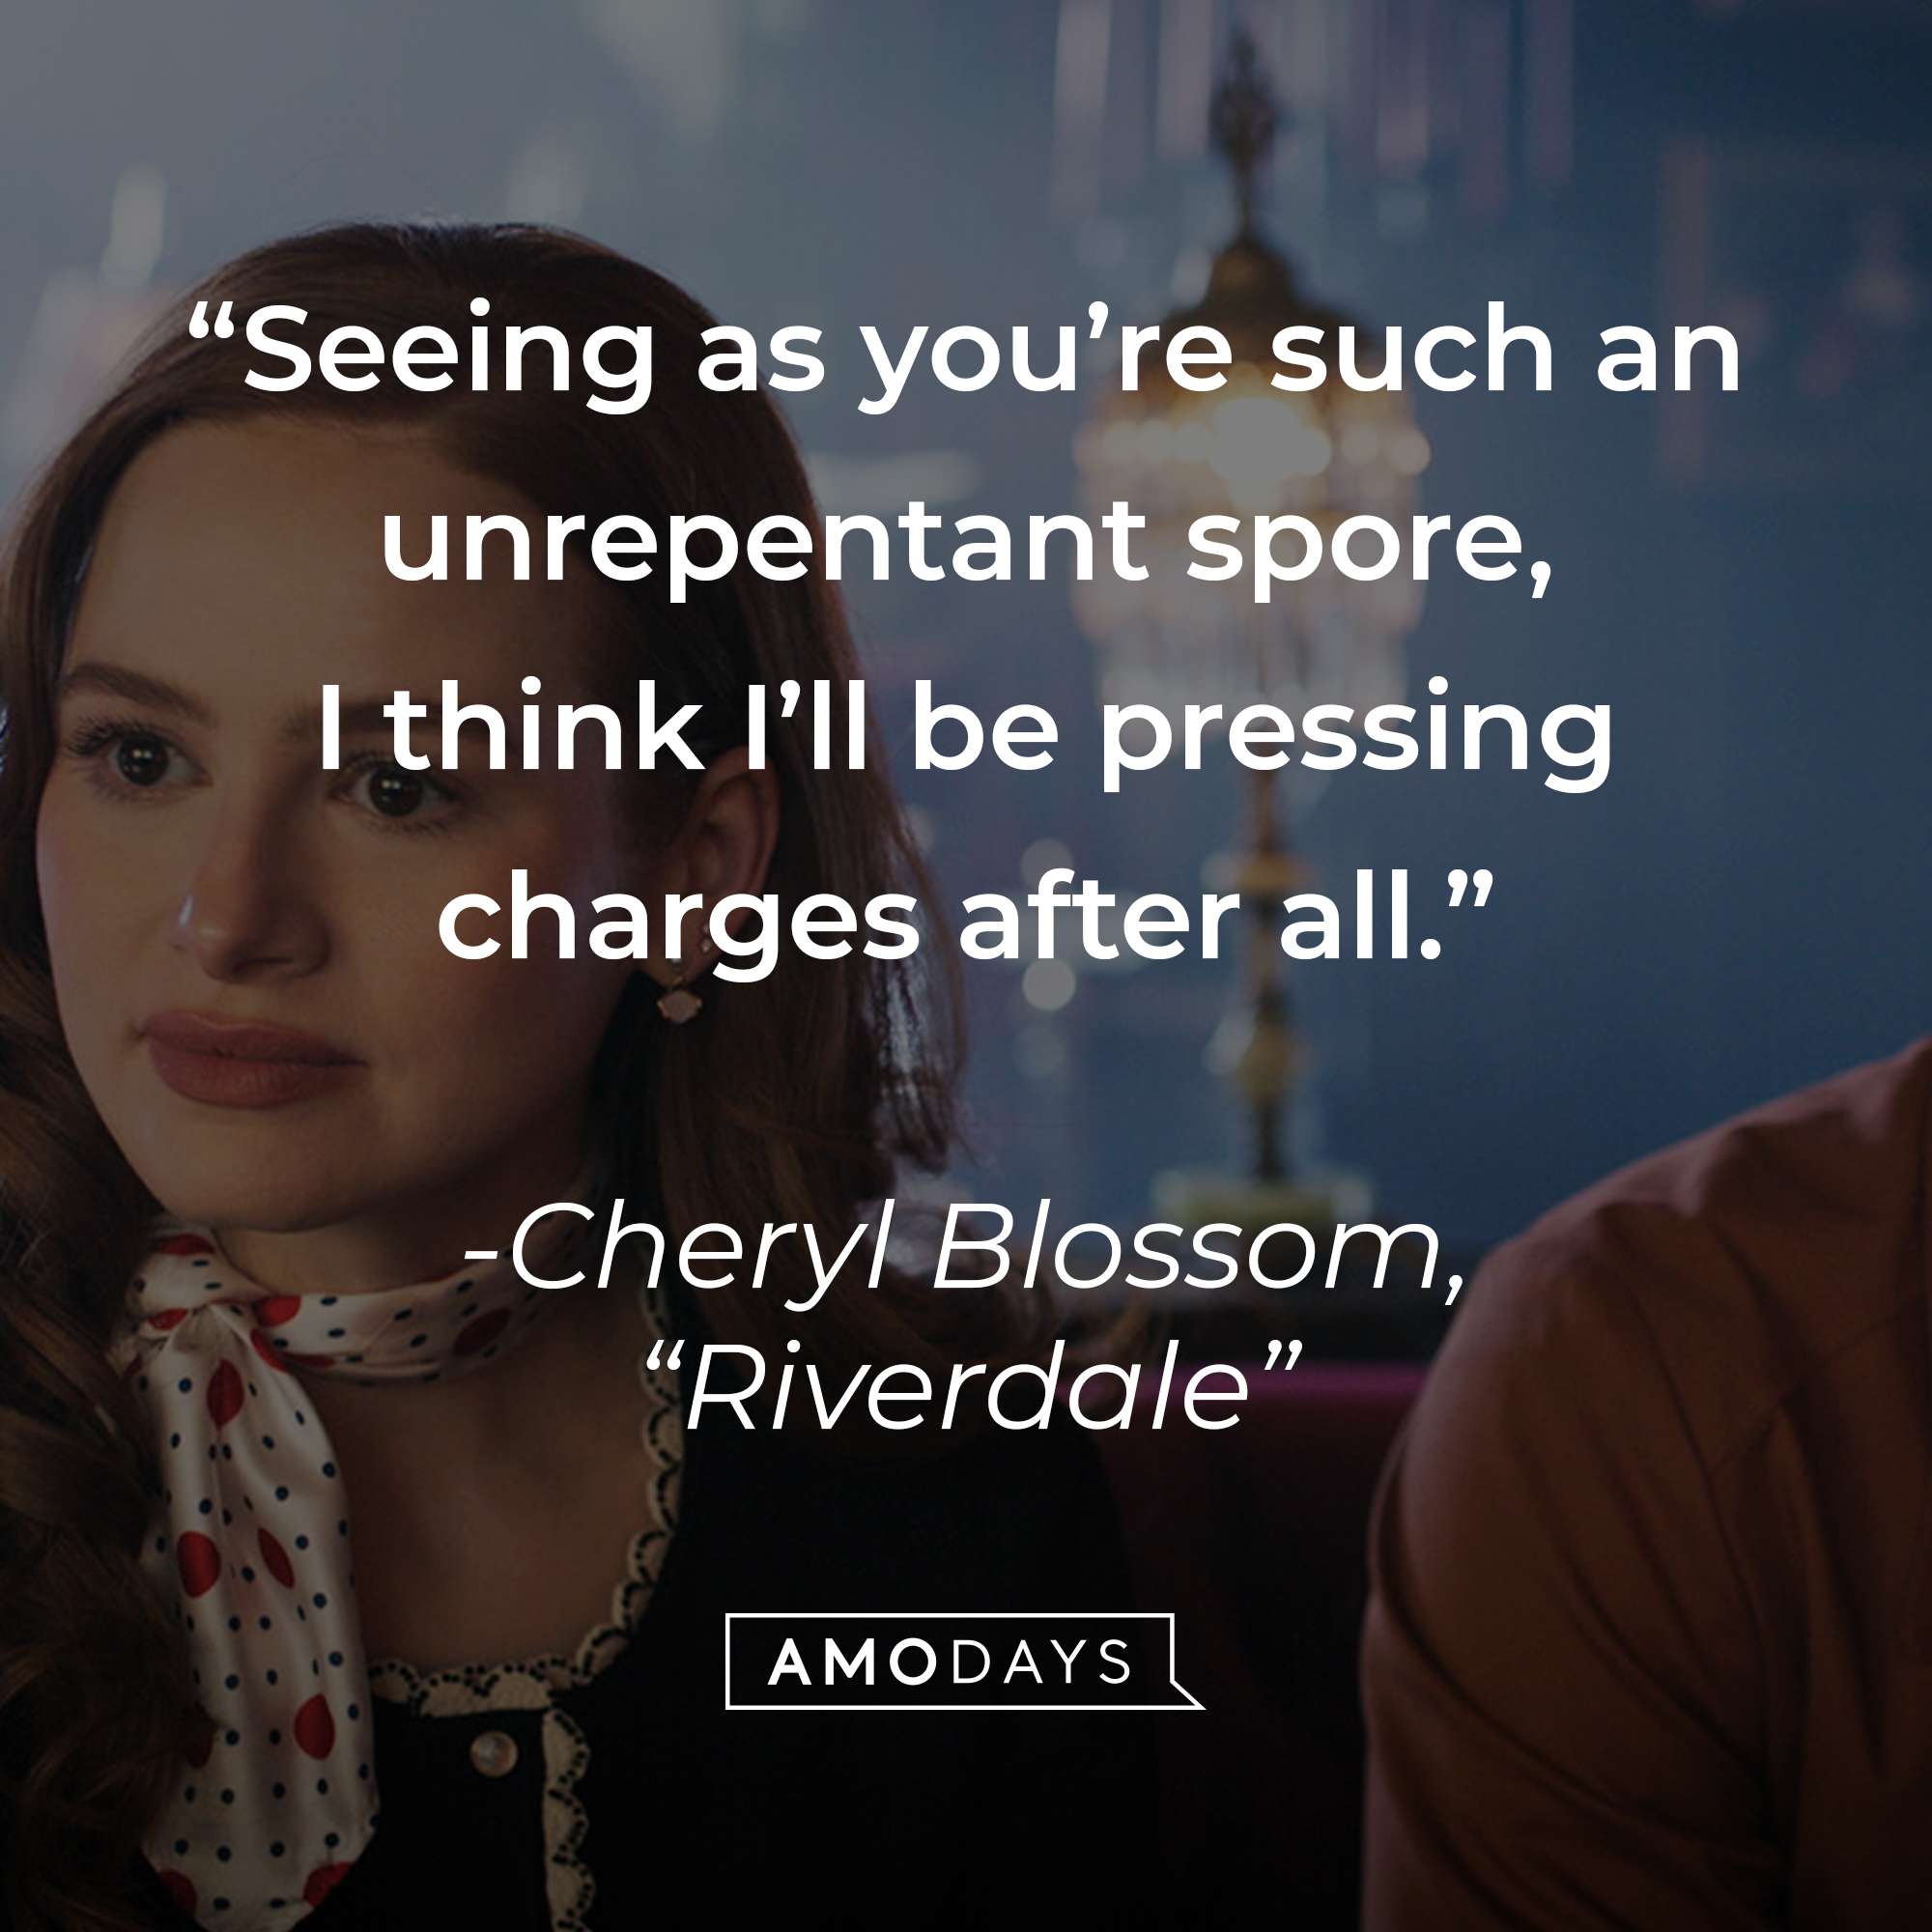 Cheryl Blossom with her quote: “Seeing as you’re such an unrepentant spore, I think I’ll be pressing charges after all.” | Source: Facebook.com/CWRiverdale